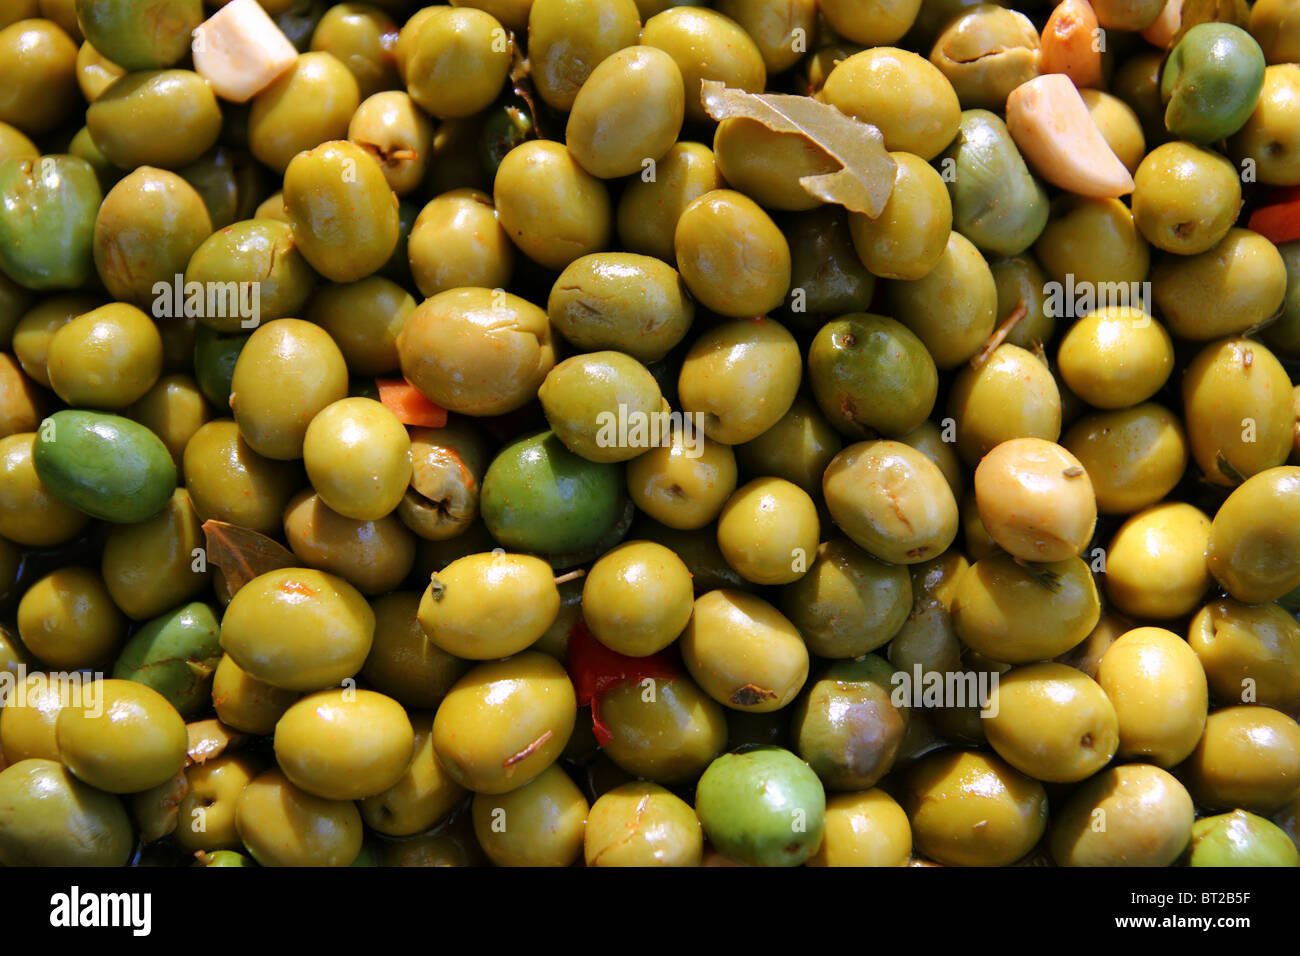 olives in pickling brine pattern background texture in market Stock Photo